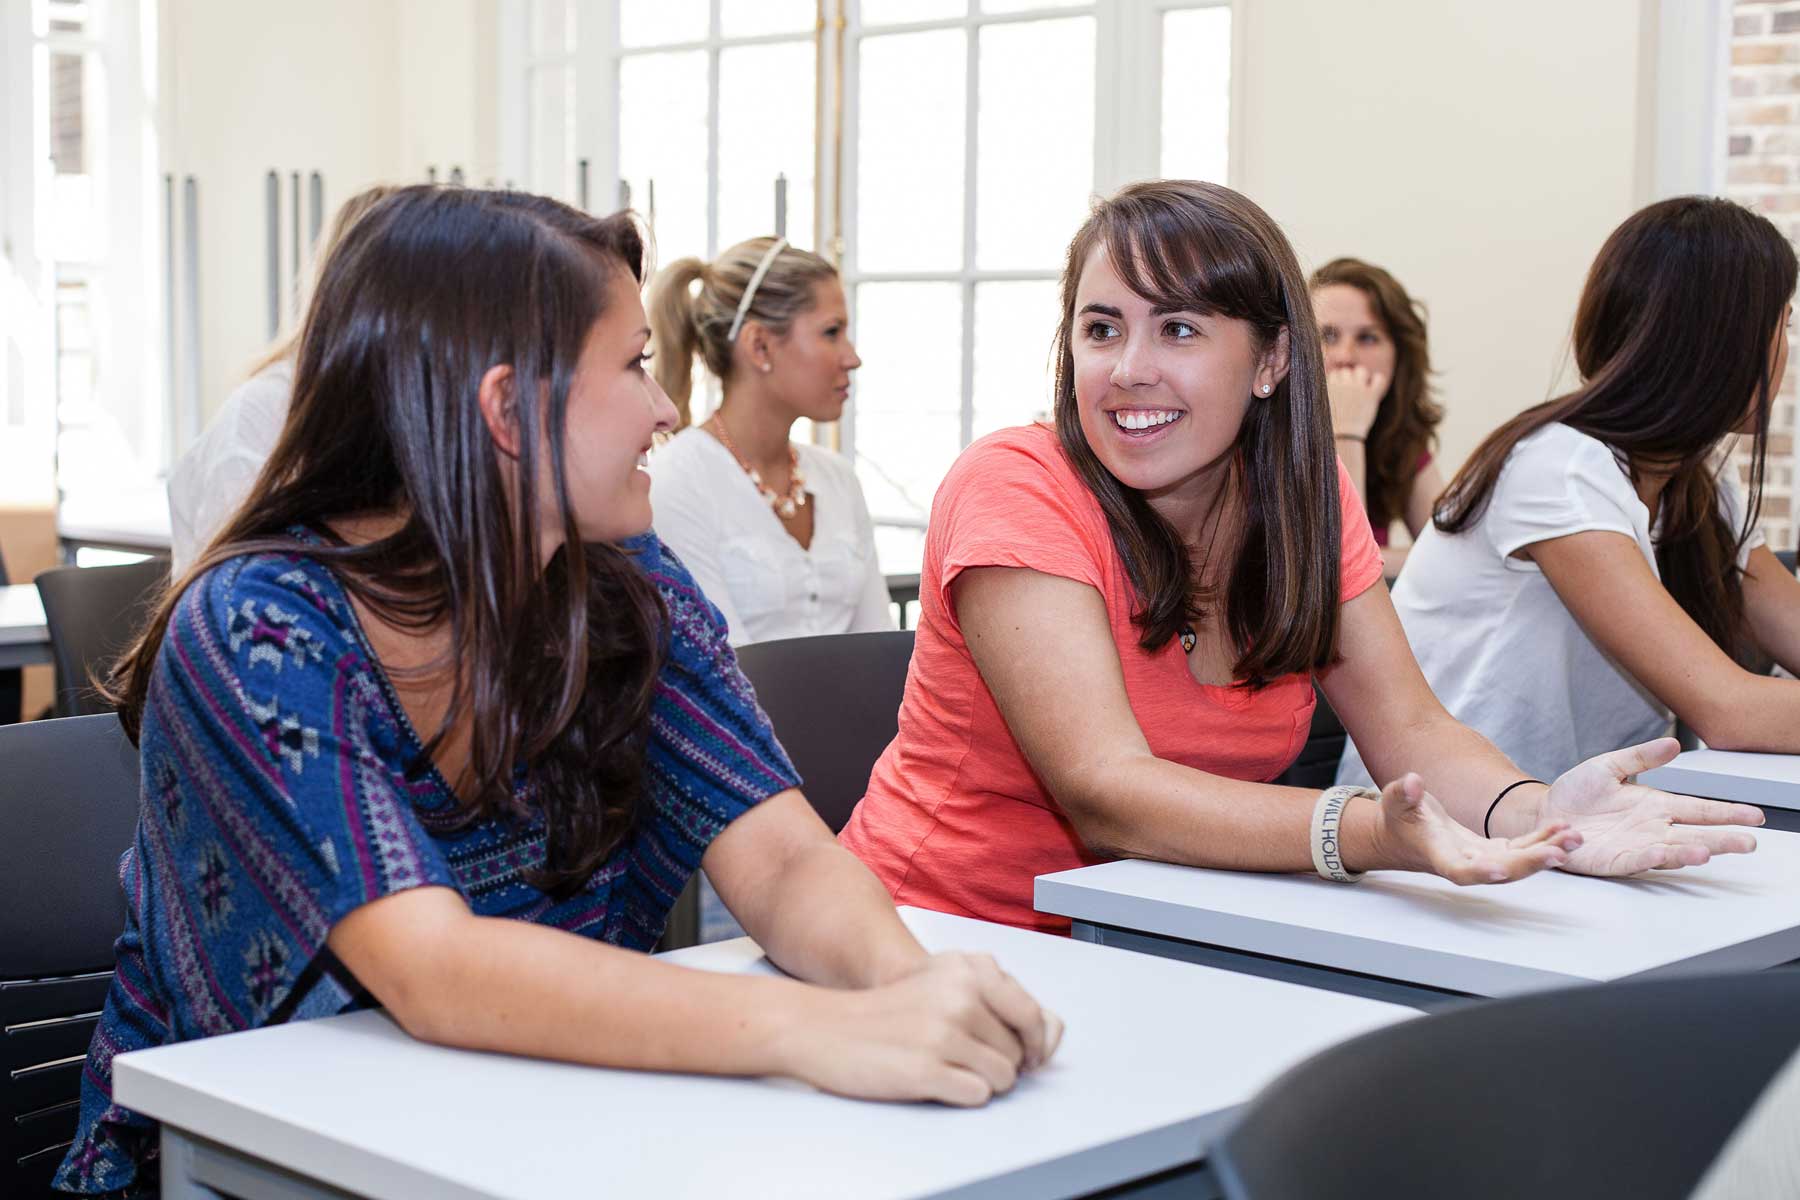 Photo: Two students talking, smiling and laughing in class